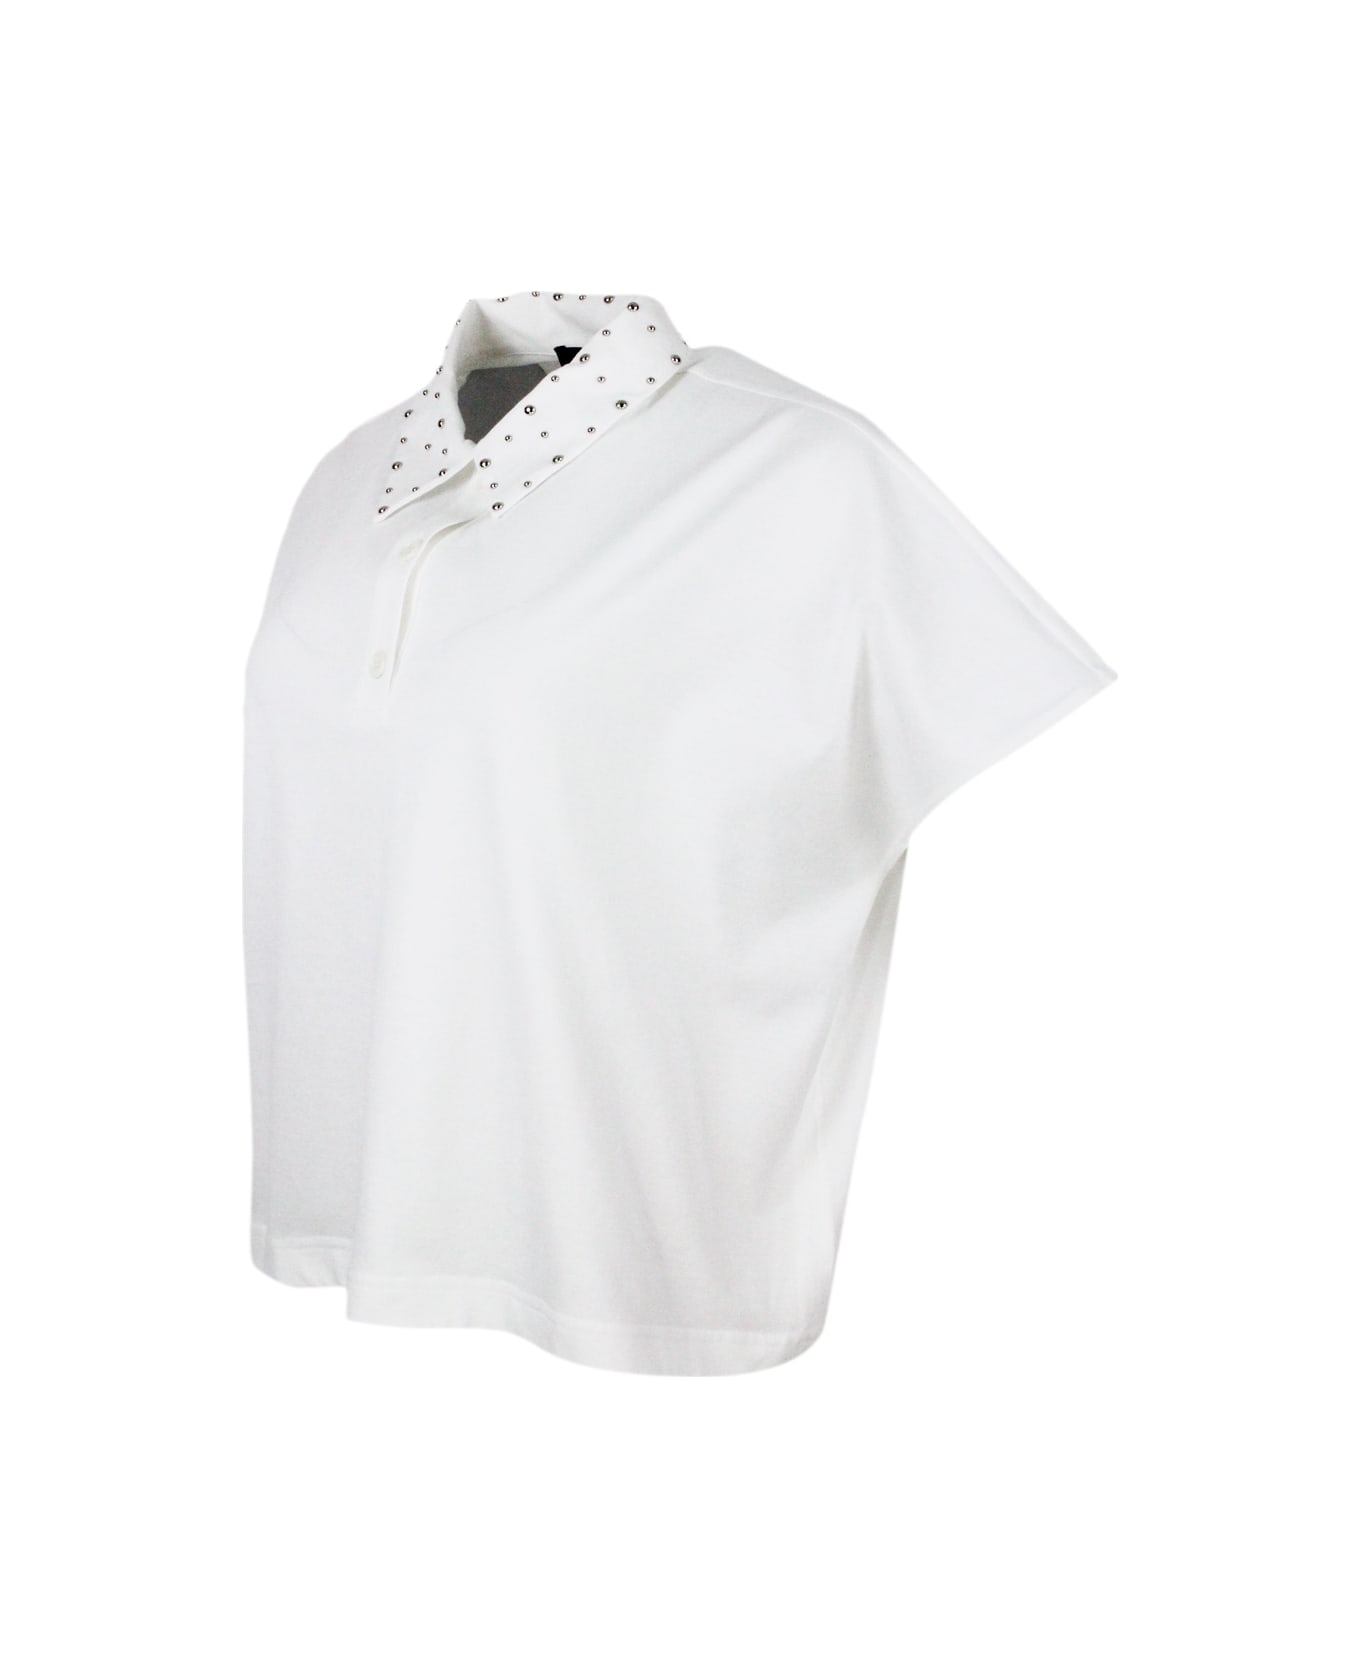 Fabiana Filippi 3-button Short-sleeved Cotton Jersey Polo Shirt Embellished With Studs On The Collar - White